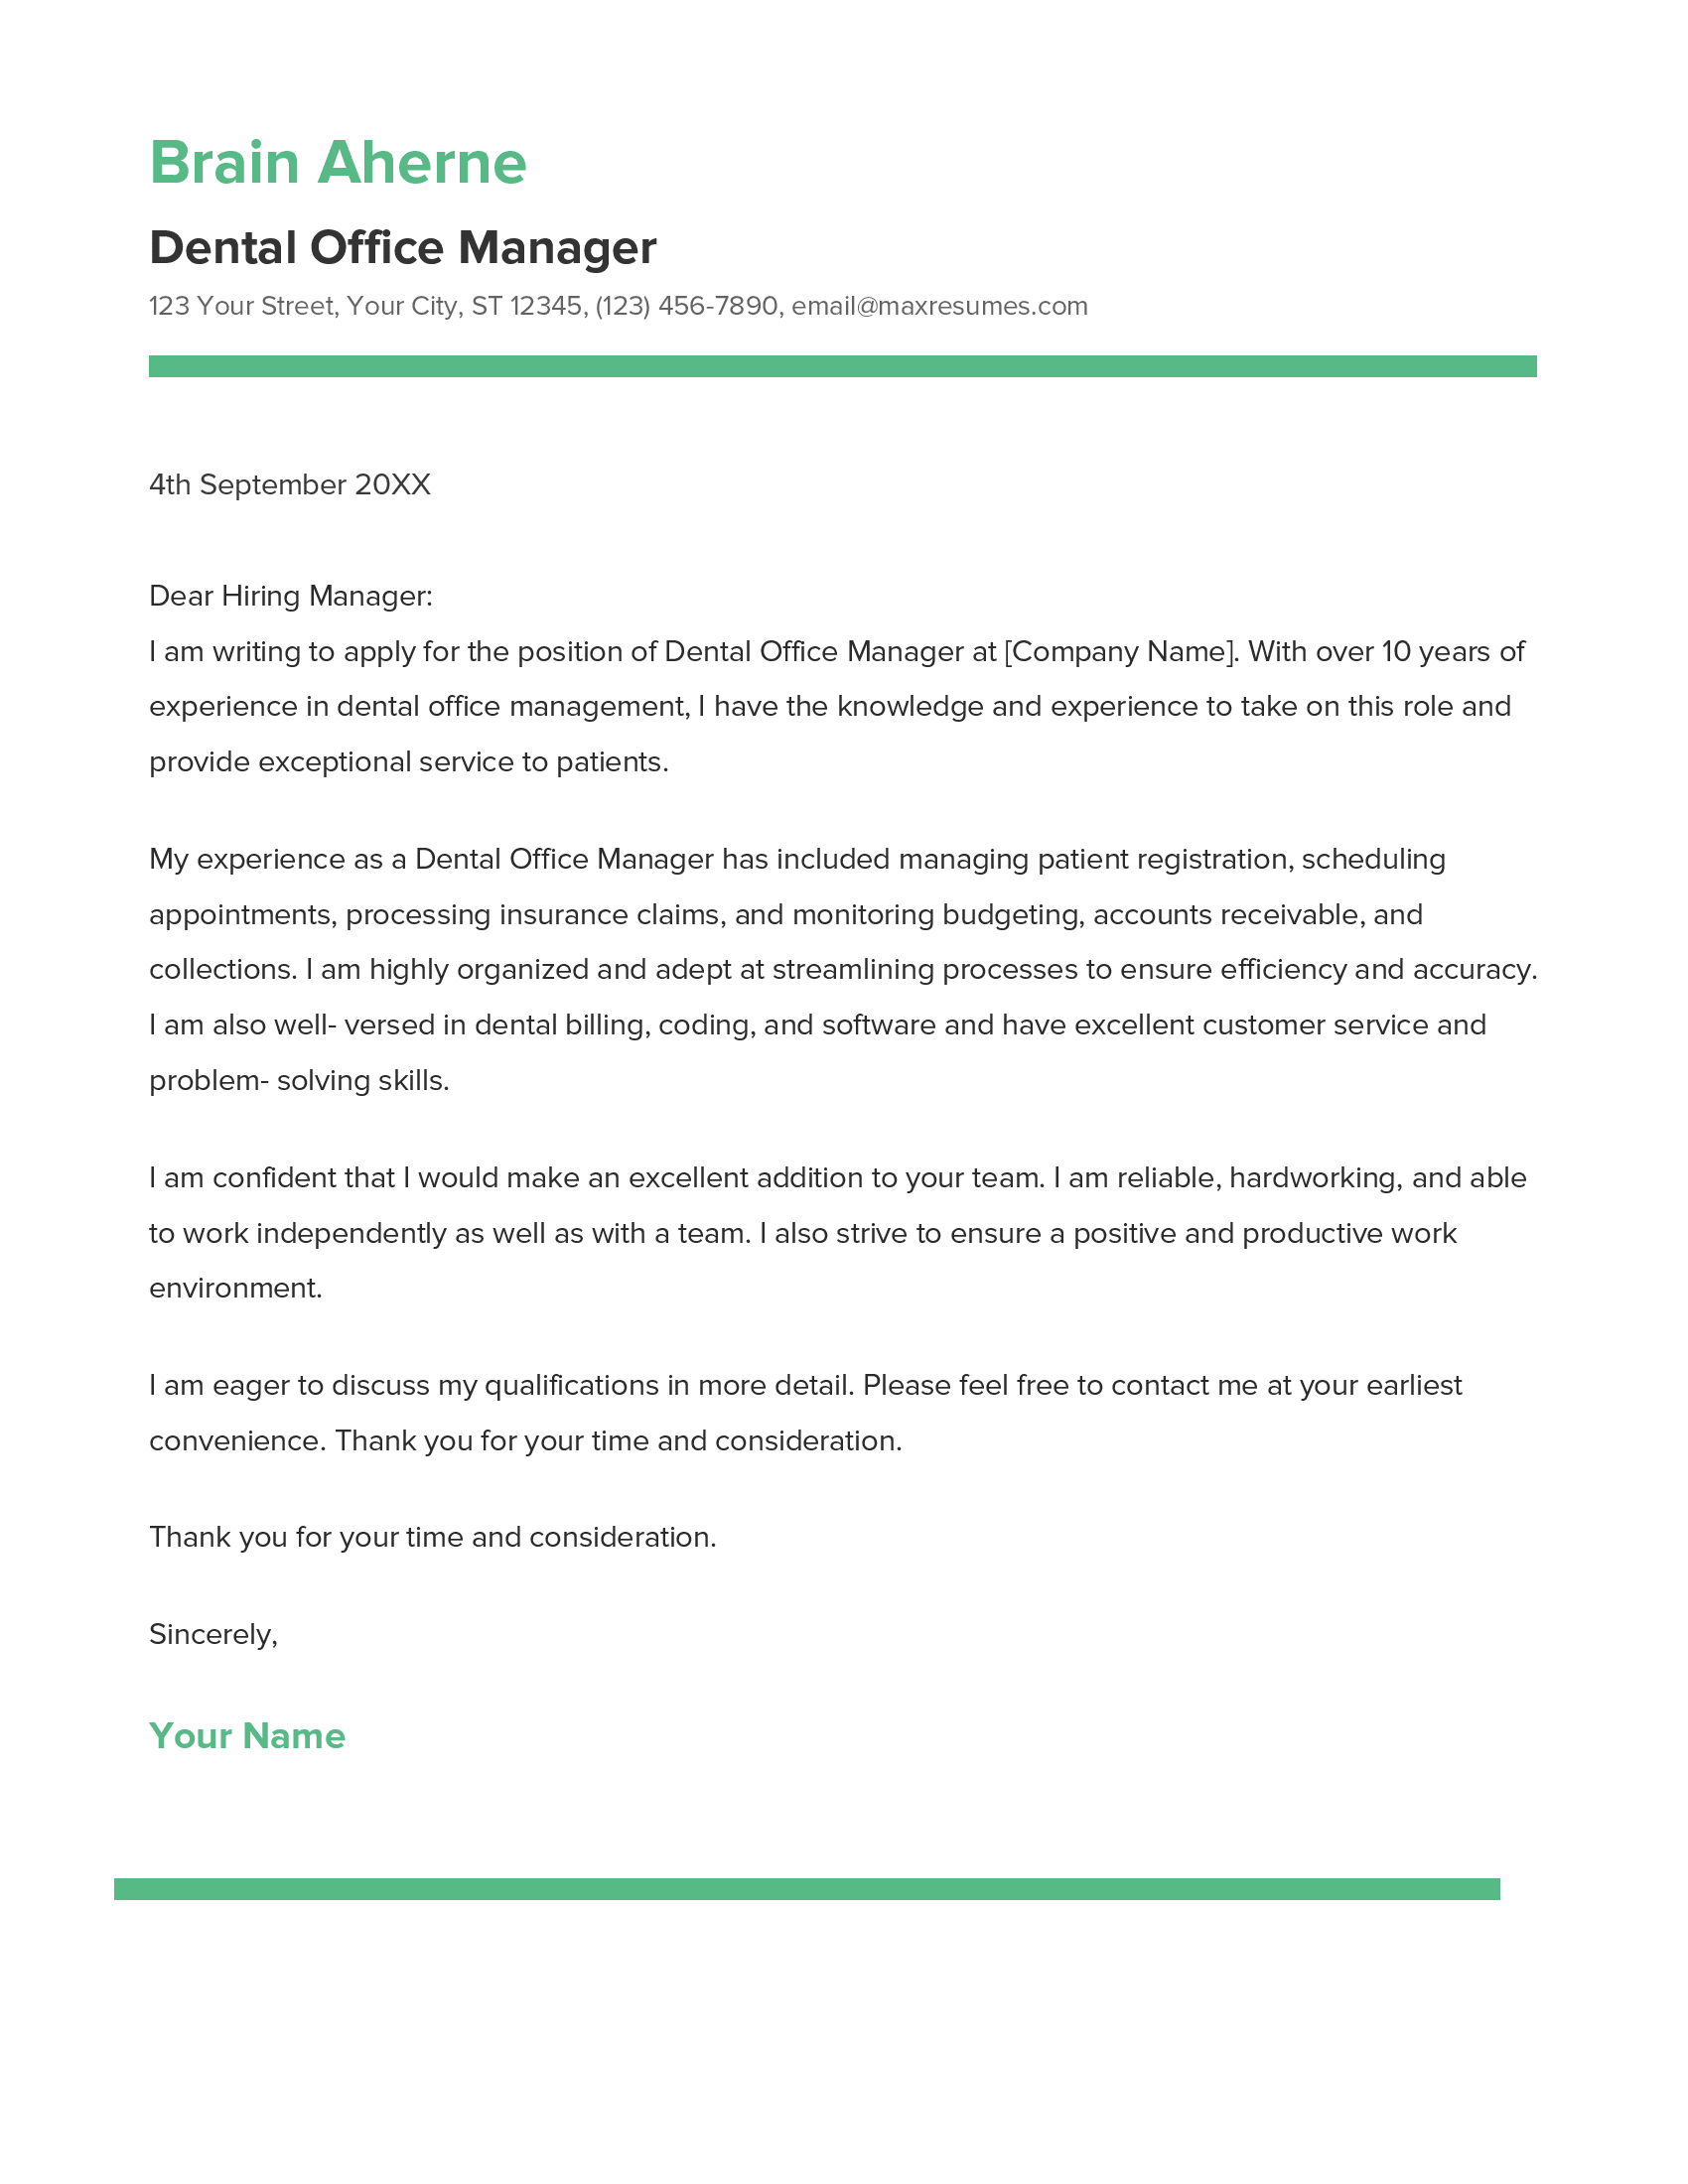 Dental Office Manager Cover Letter Example